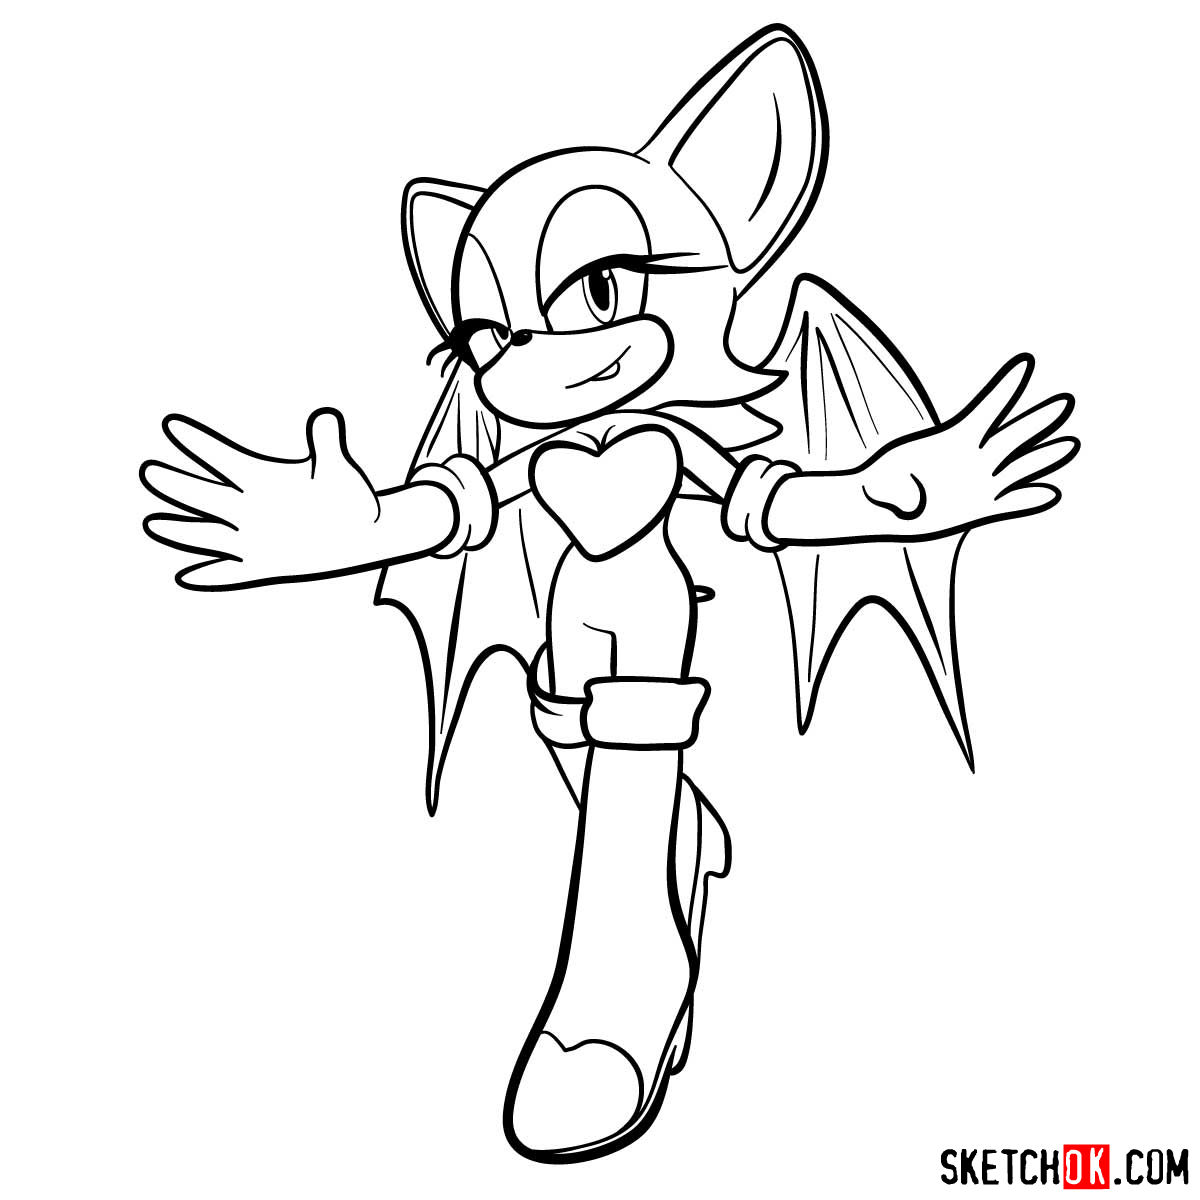 How to draw Rouge the Bat from Sonic the Hedgehog